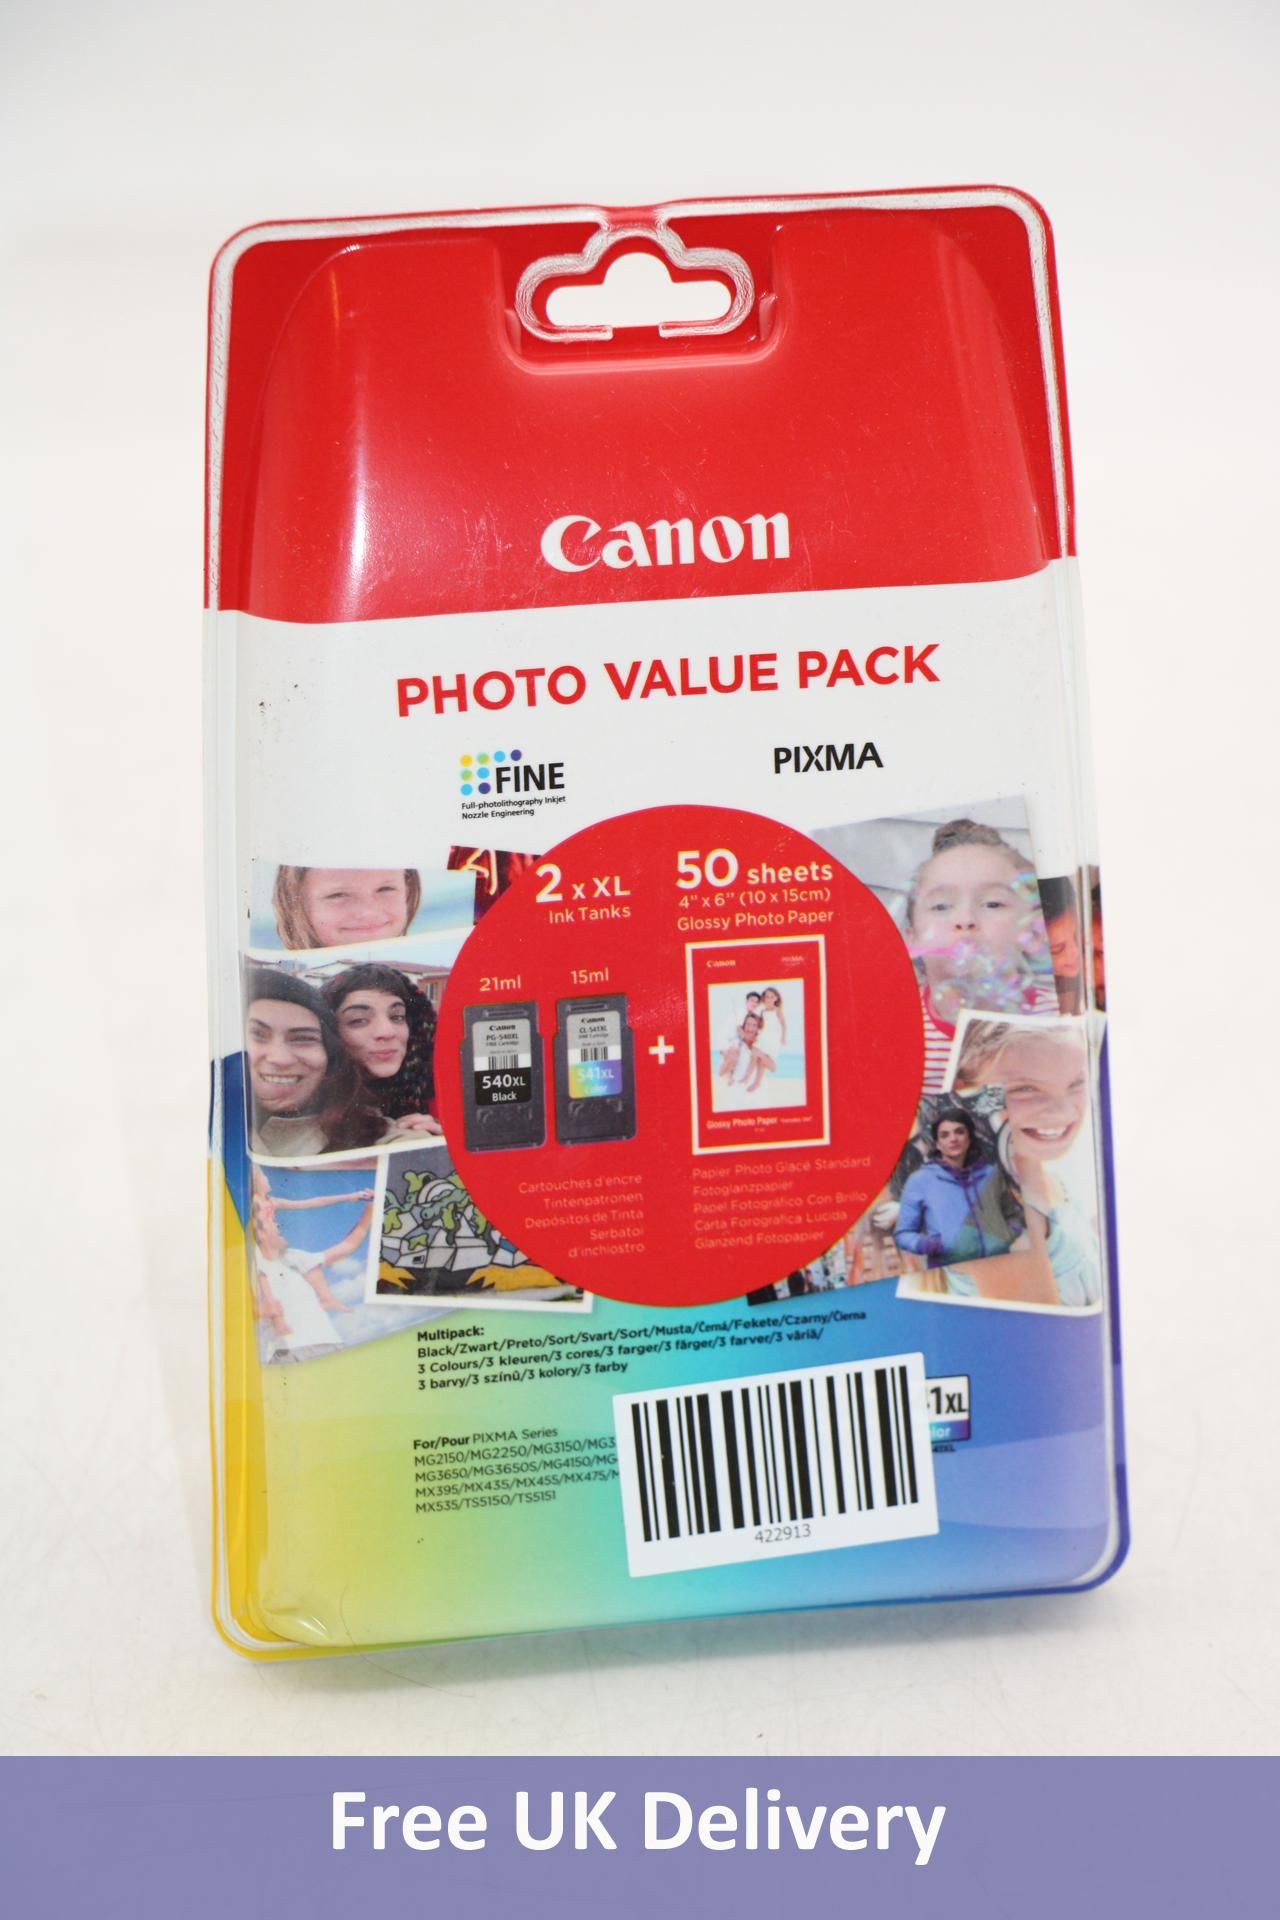 Canon Photo Value Pack to include 540 XL Black, 21ml, 541 XL Colour, 15ml, 50 Sheets 4" x 6" Paper